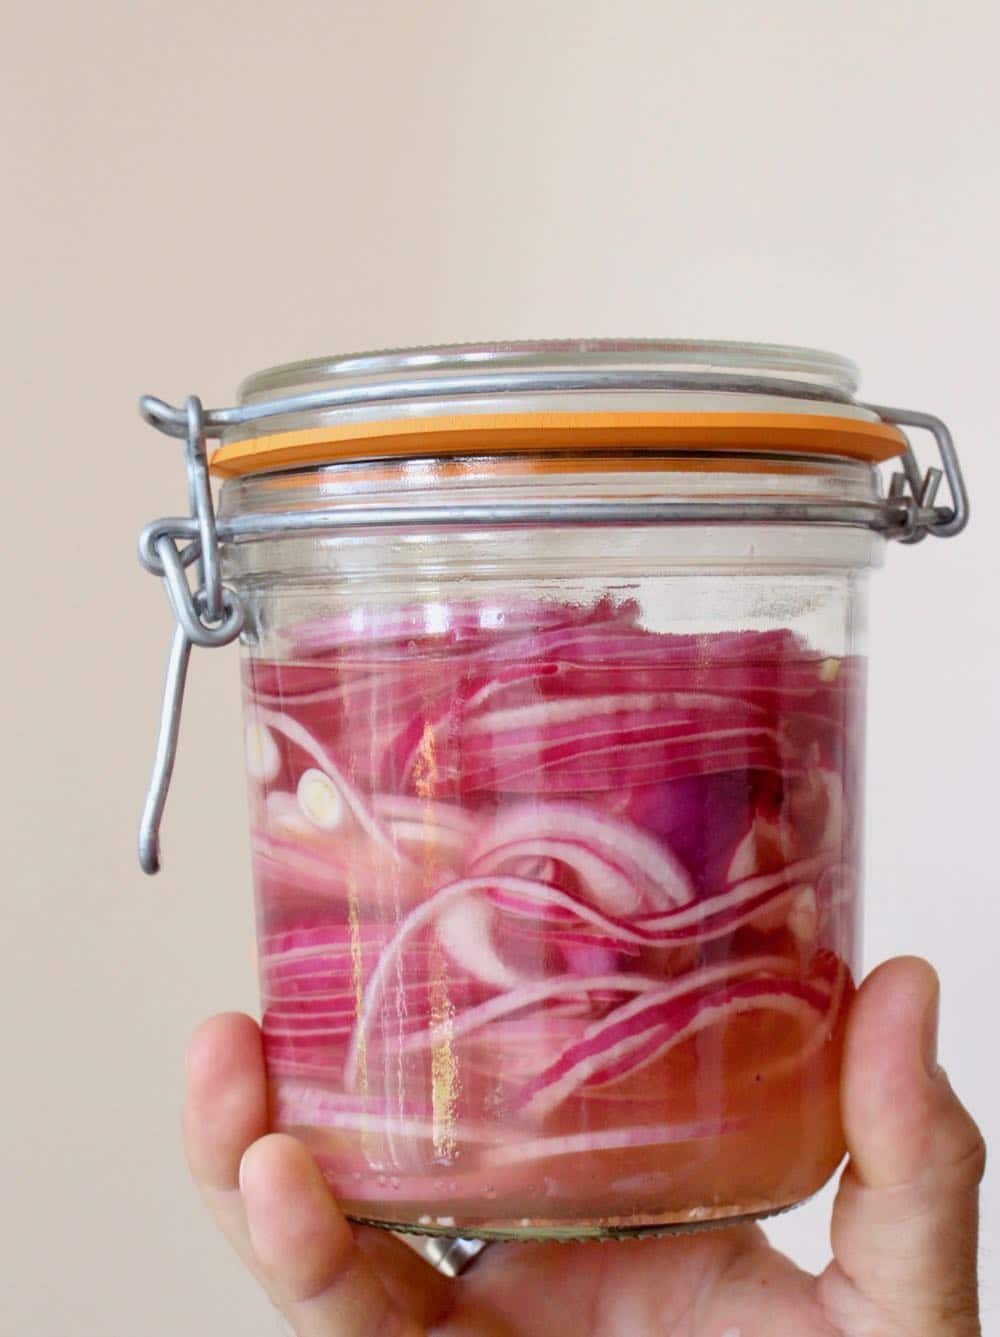 Pickled red onions in a jar.